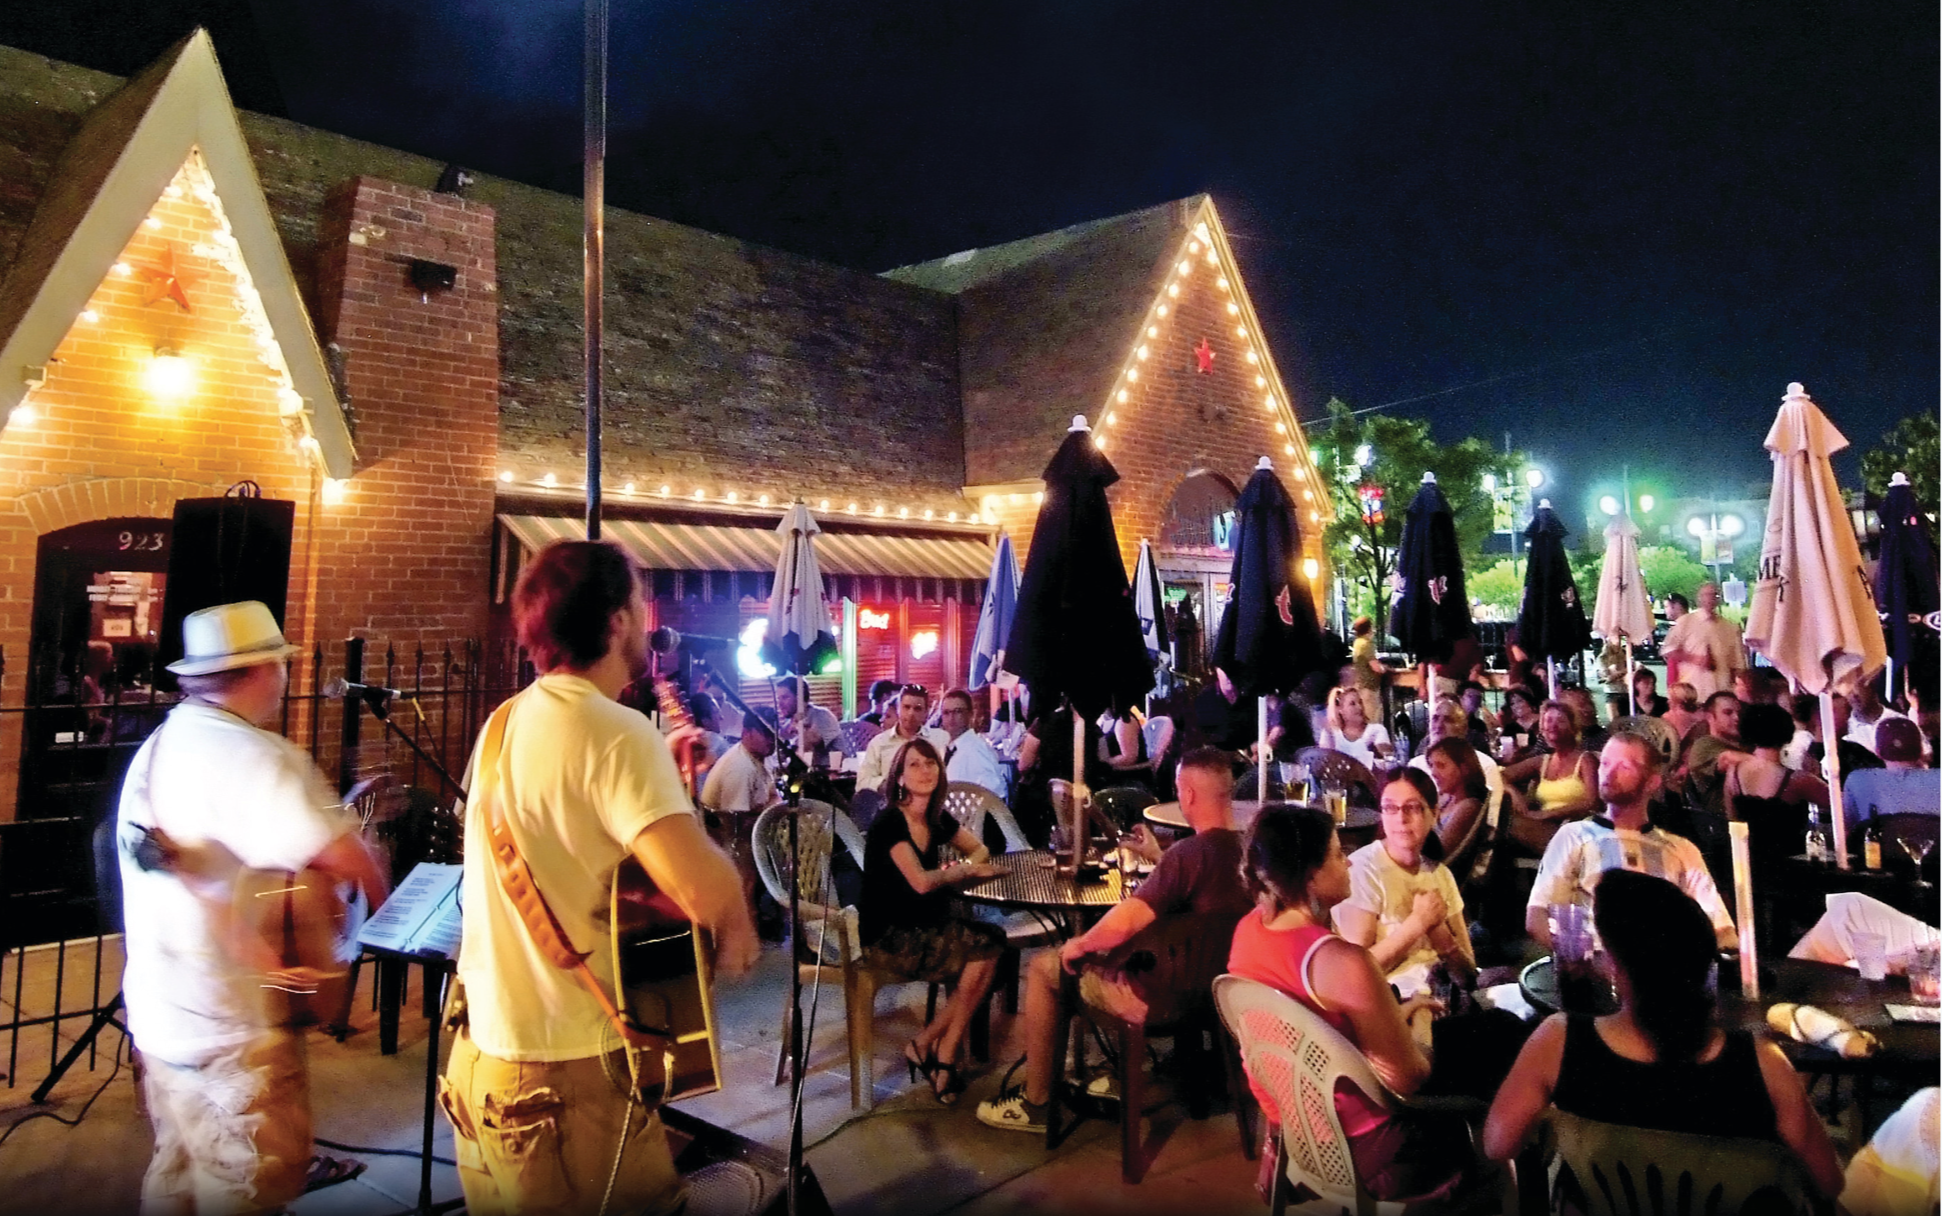 A live band performs at night in front of a patio full of people at Mort's in Wichita